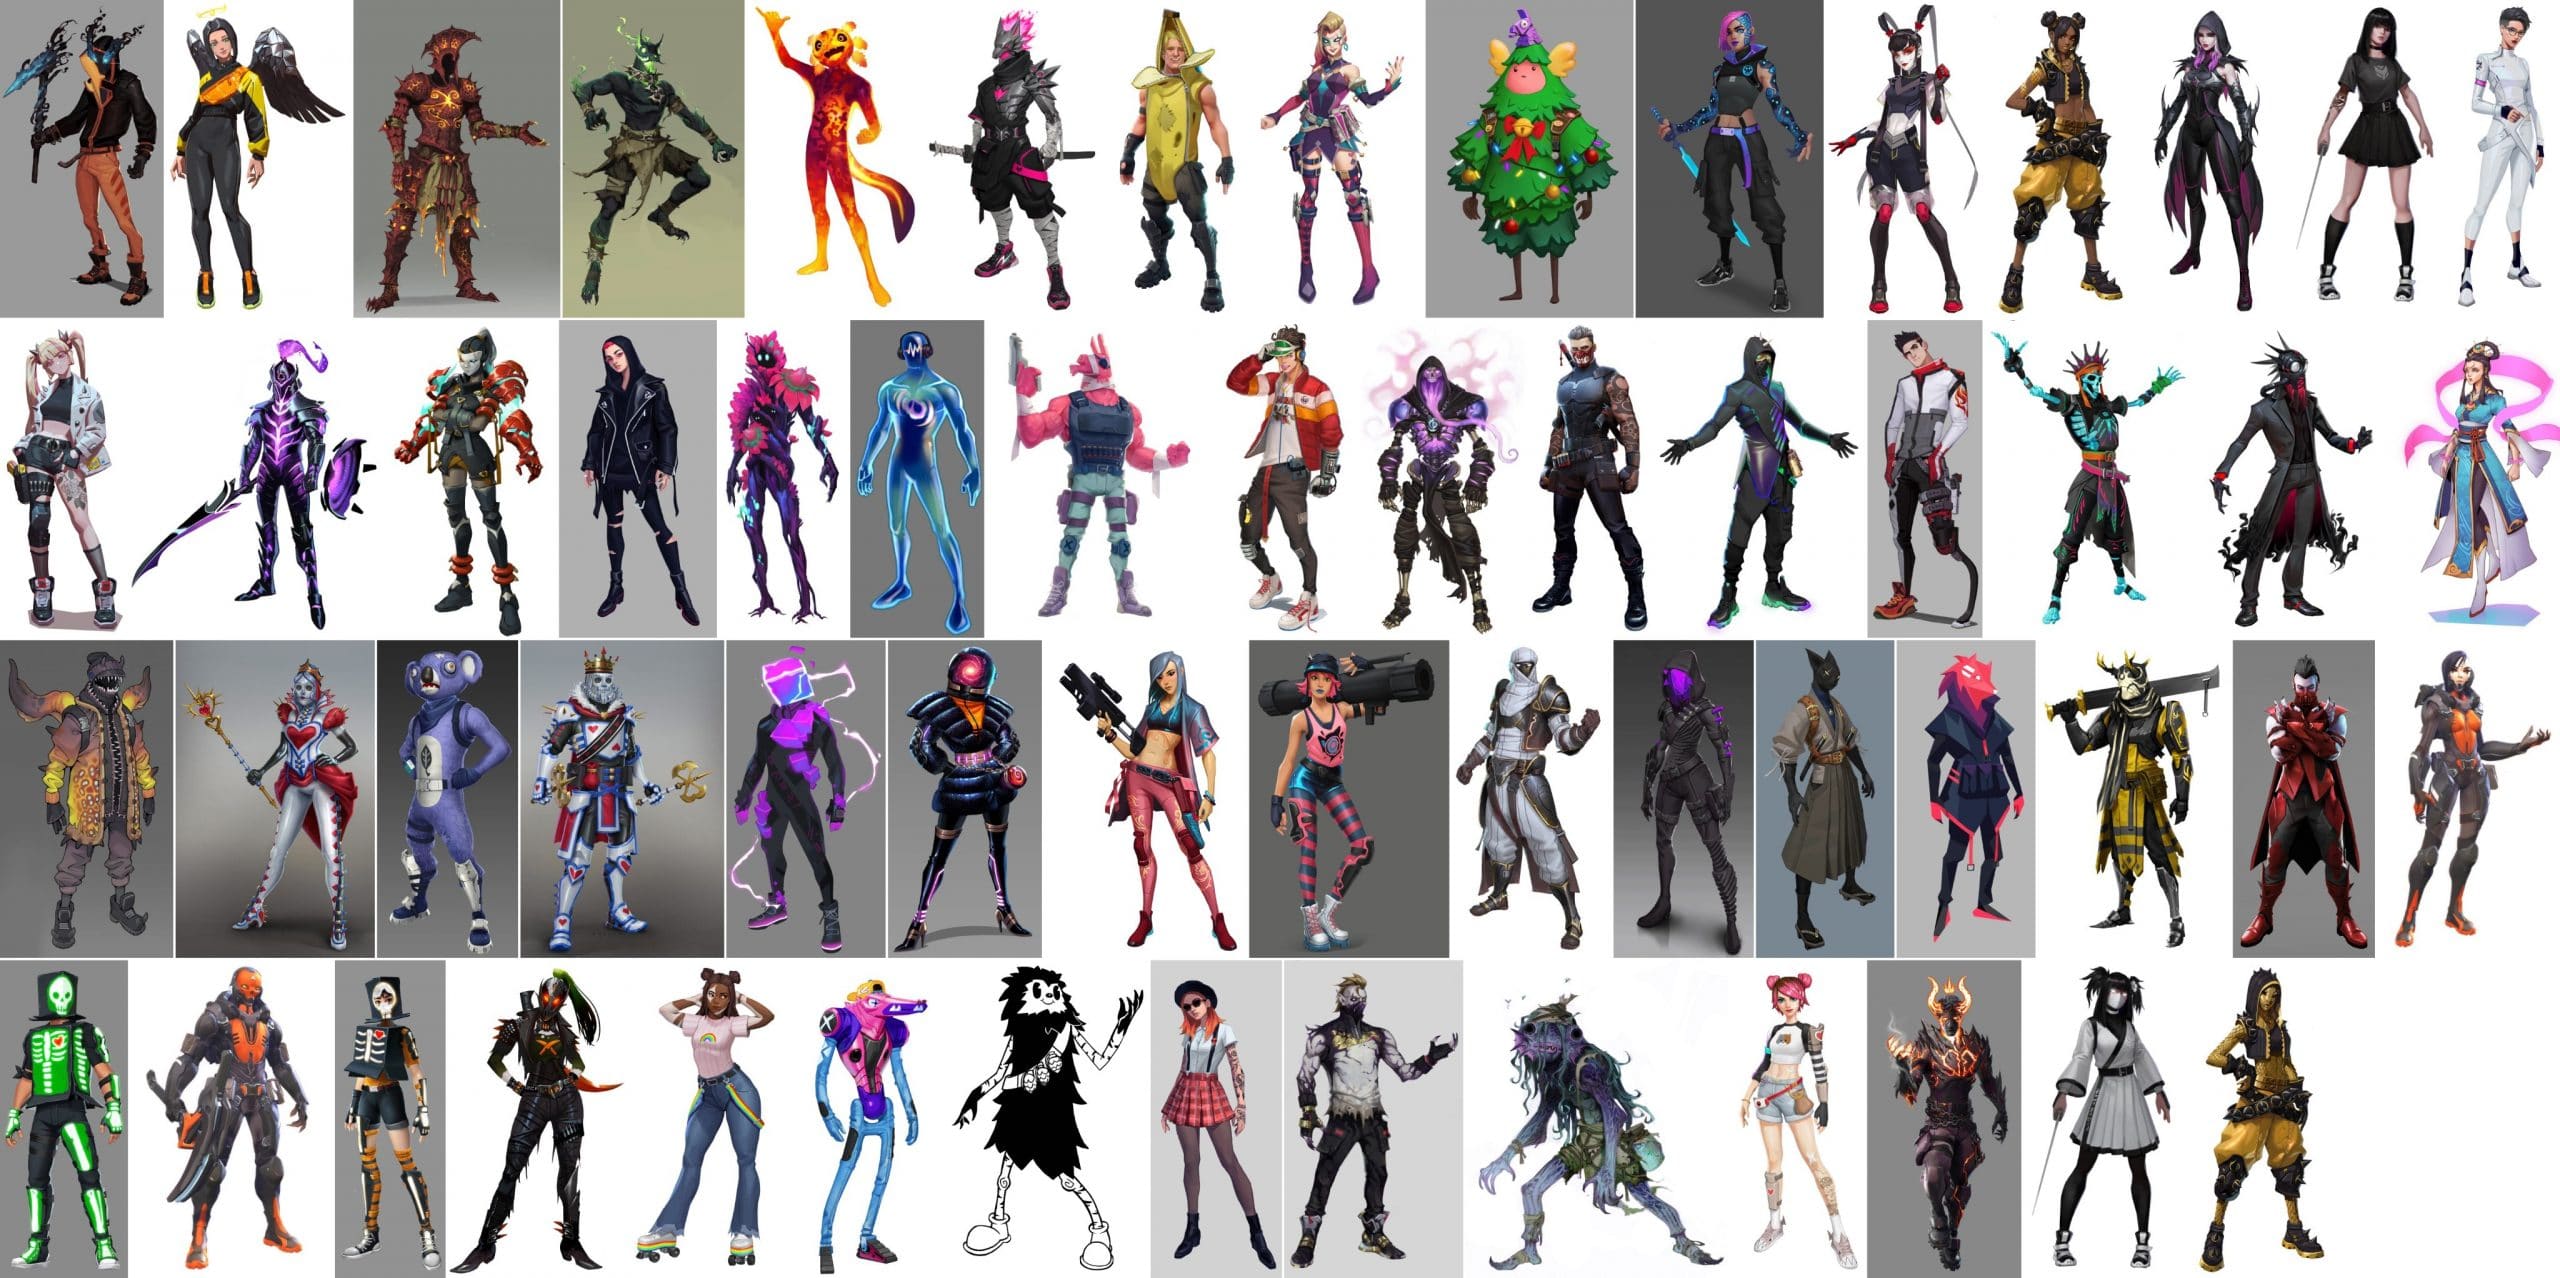 These skin concepts are coming to Fortnite - leaks